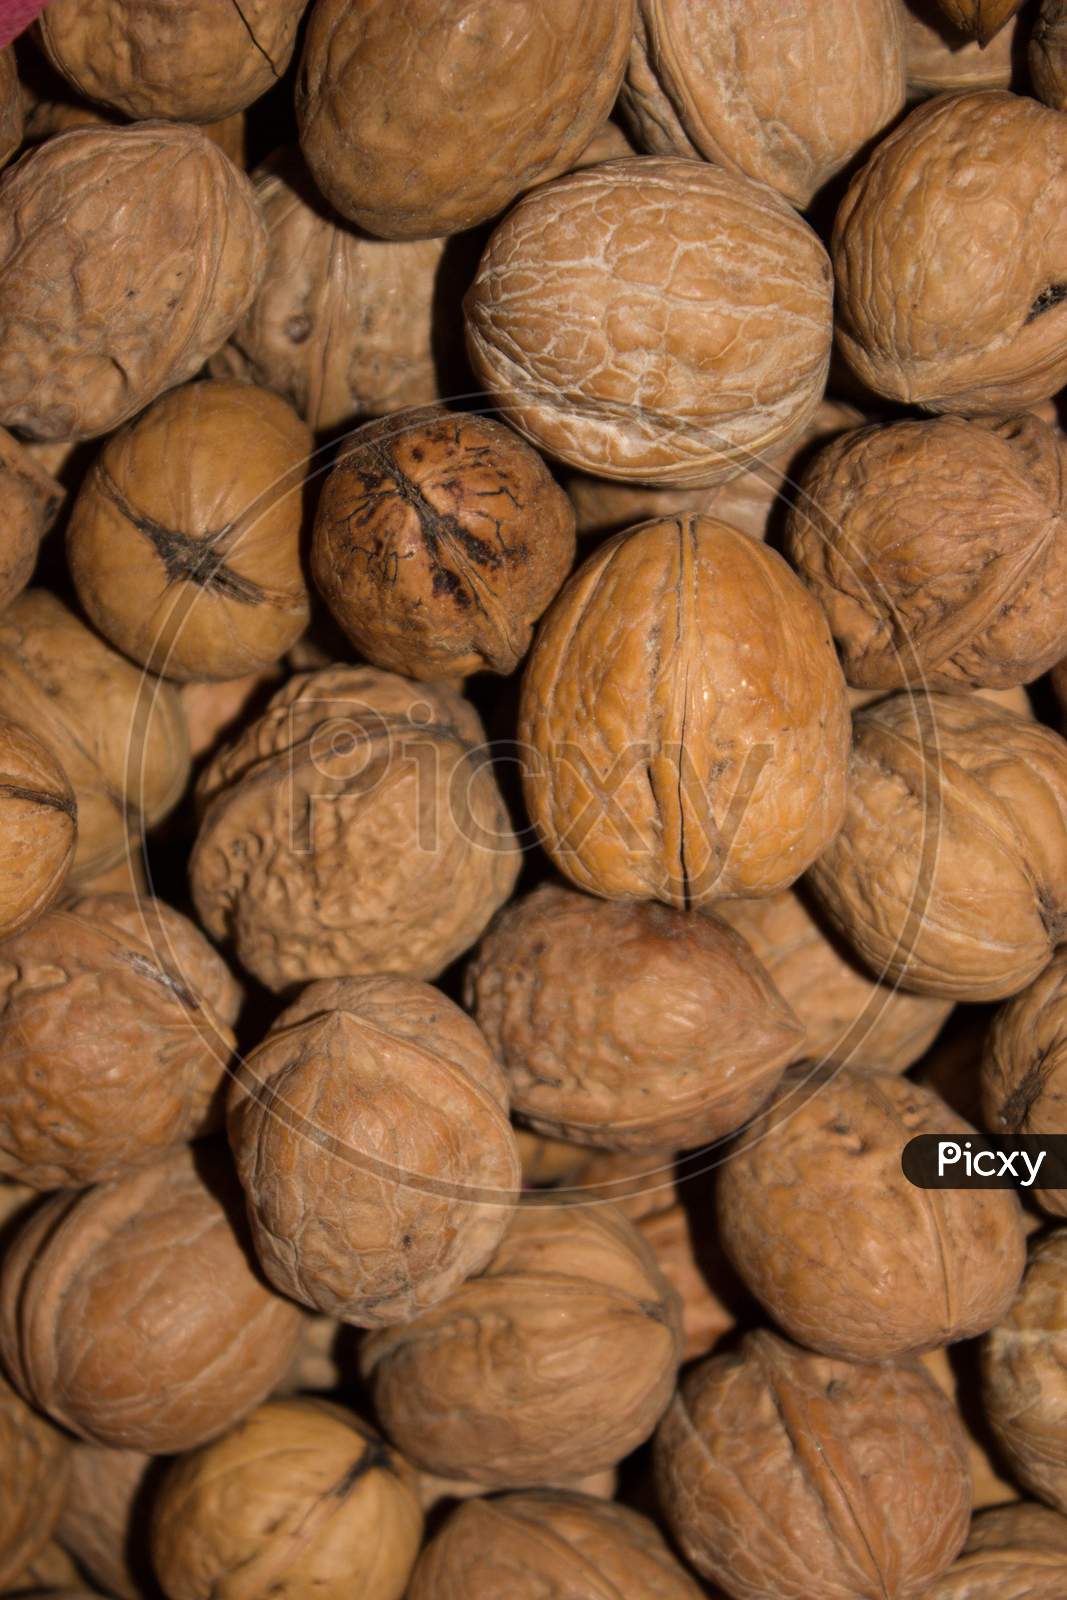 A picture of Walnuts